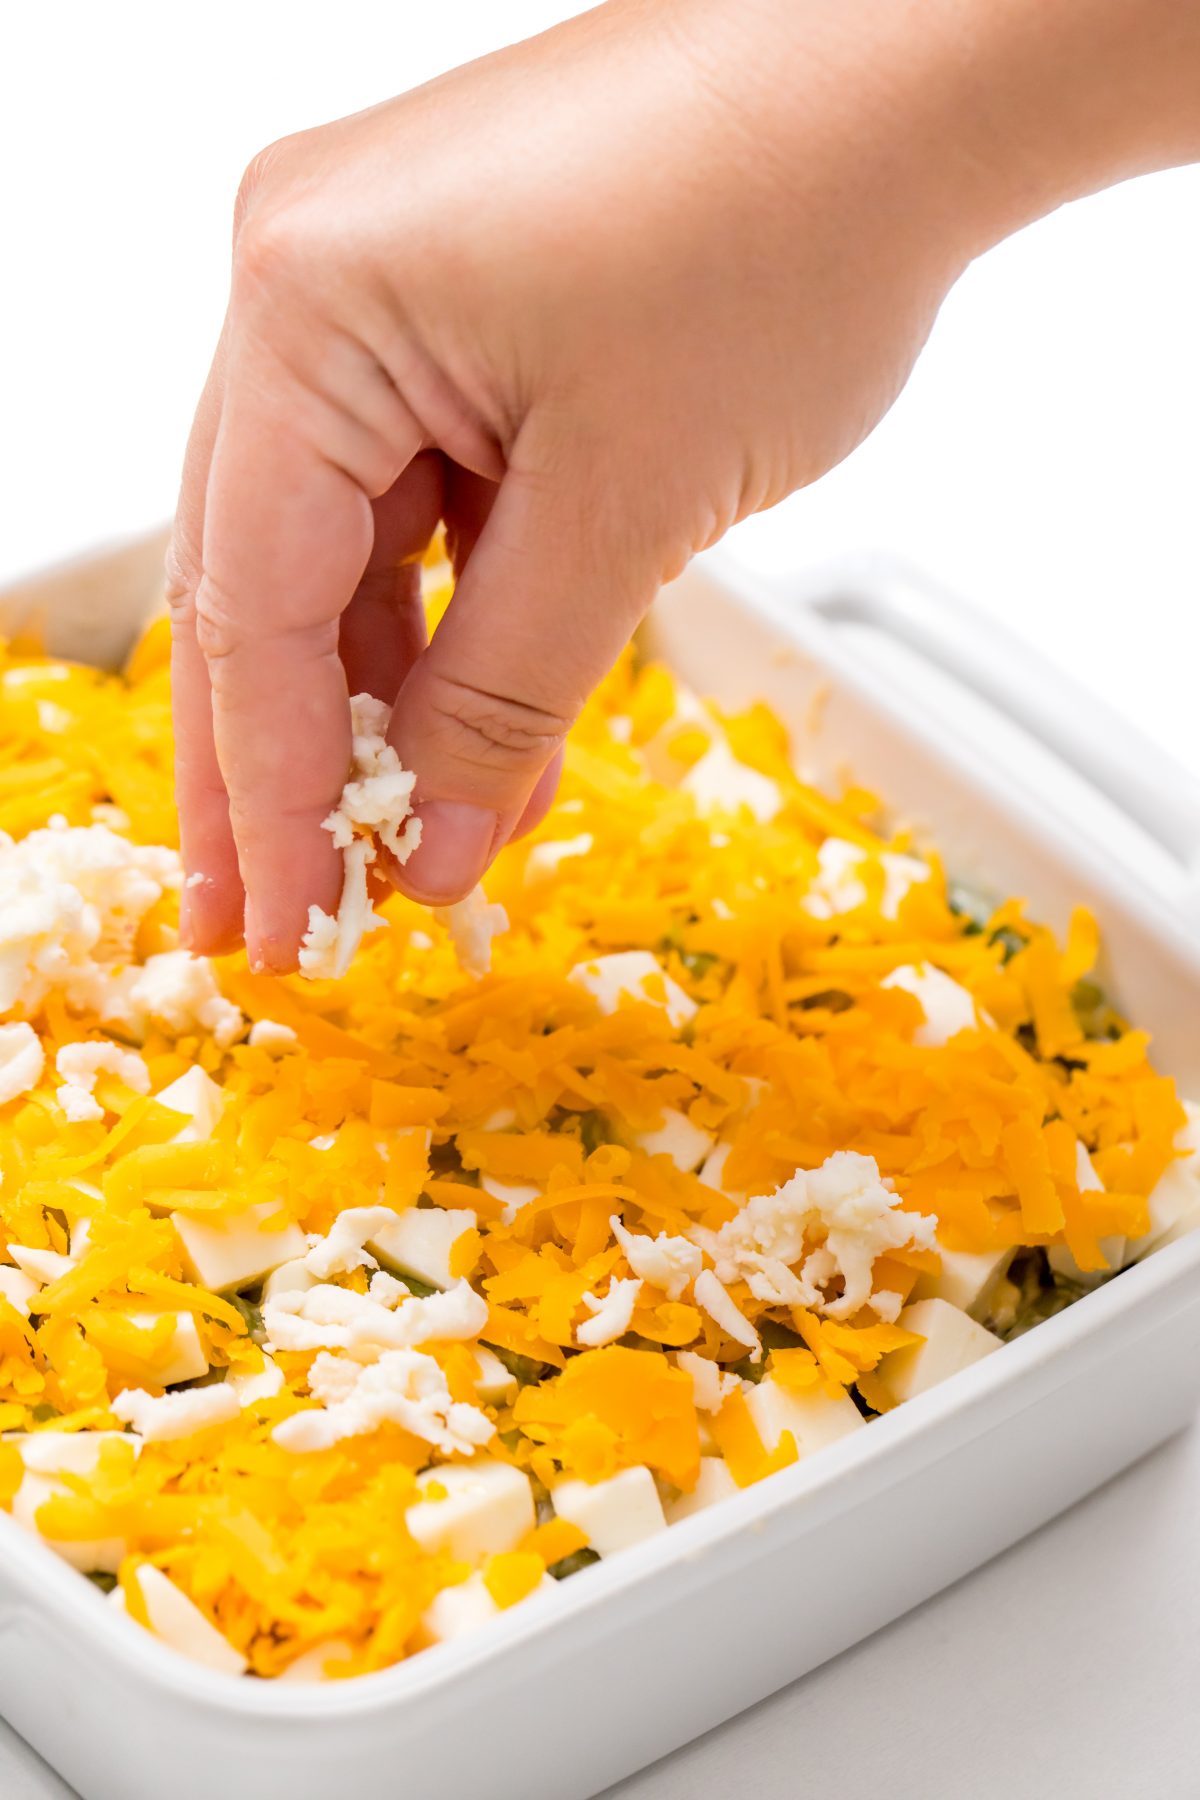 Top the casserole with more shredded cheddar and mozzarella cheese.